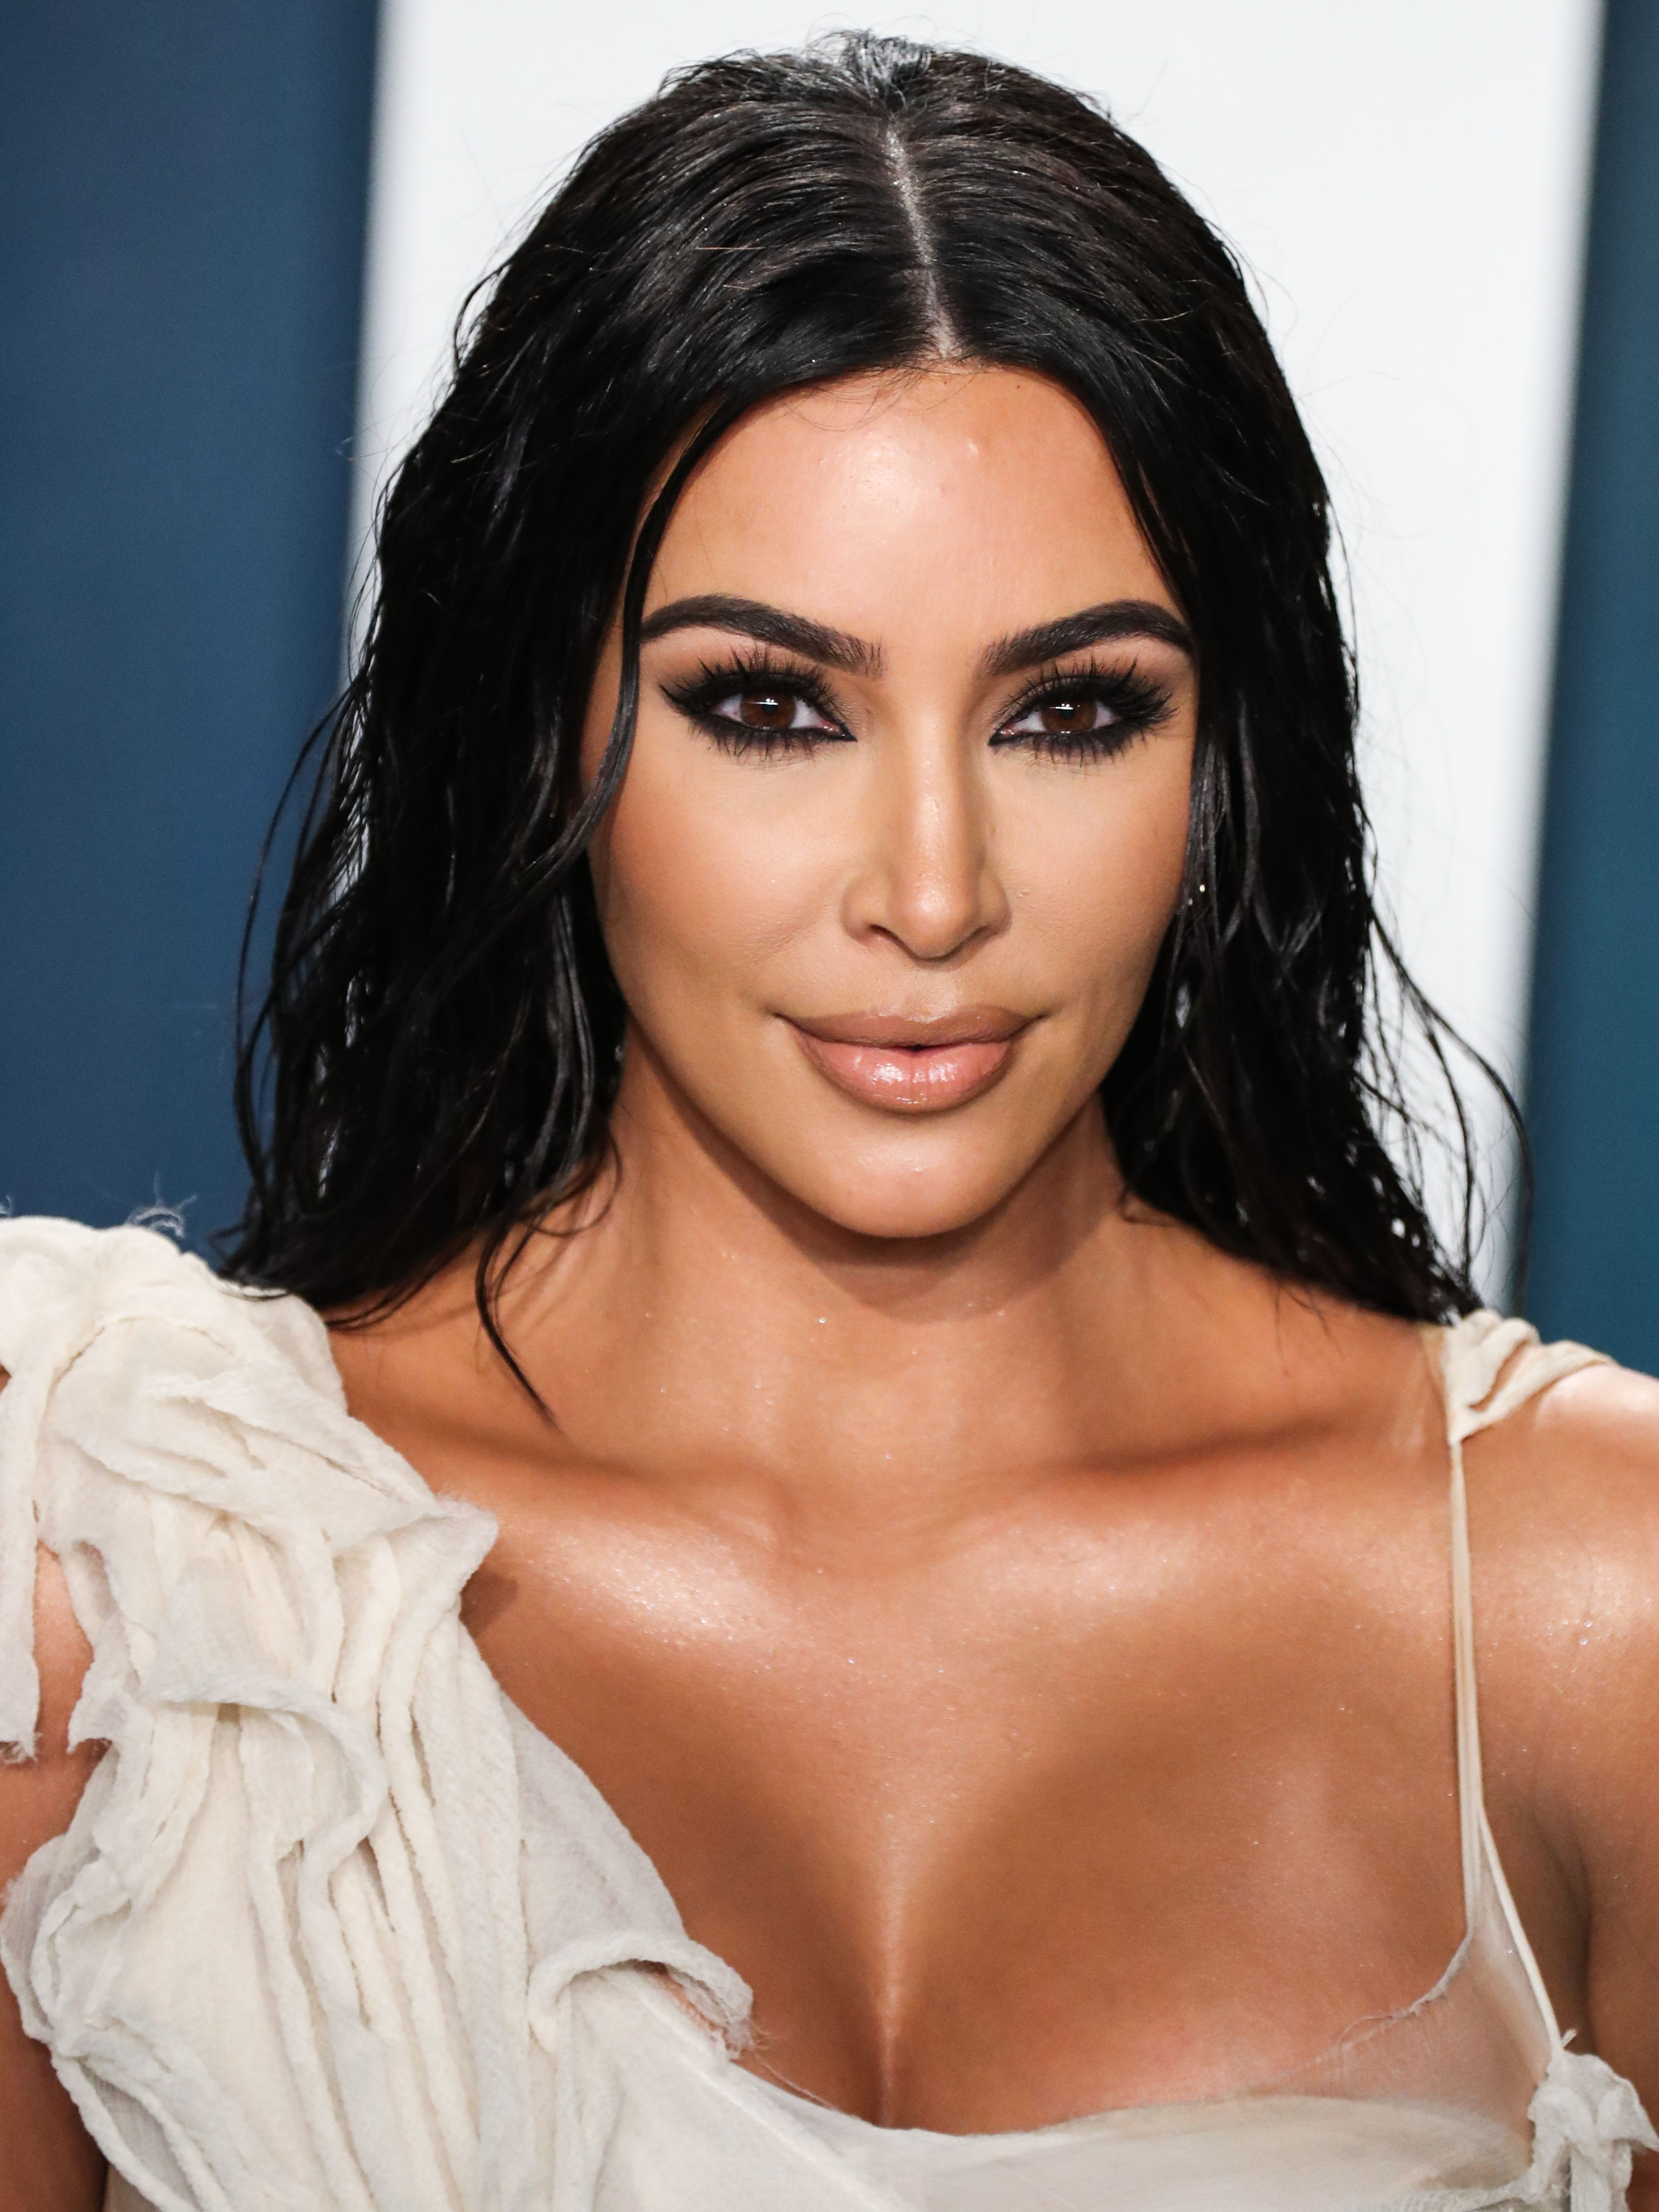 Kim Kardashian's SKKN Brand Hit With Cease & Desist Letters Over Name